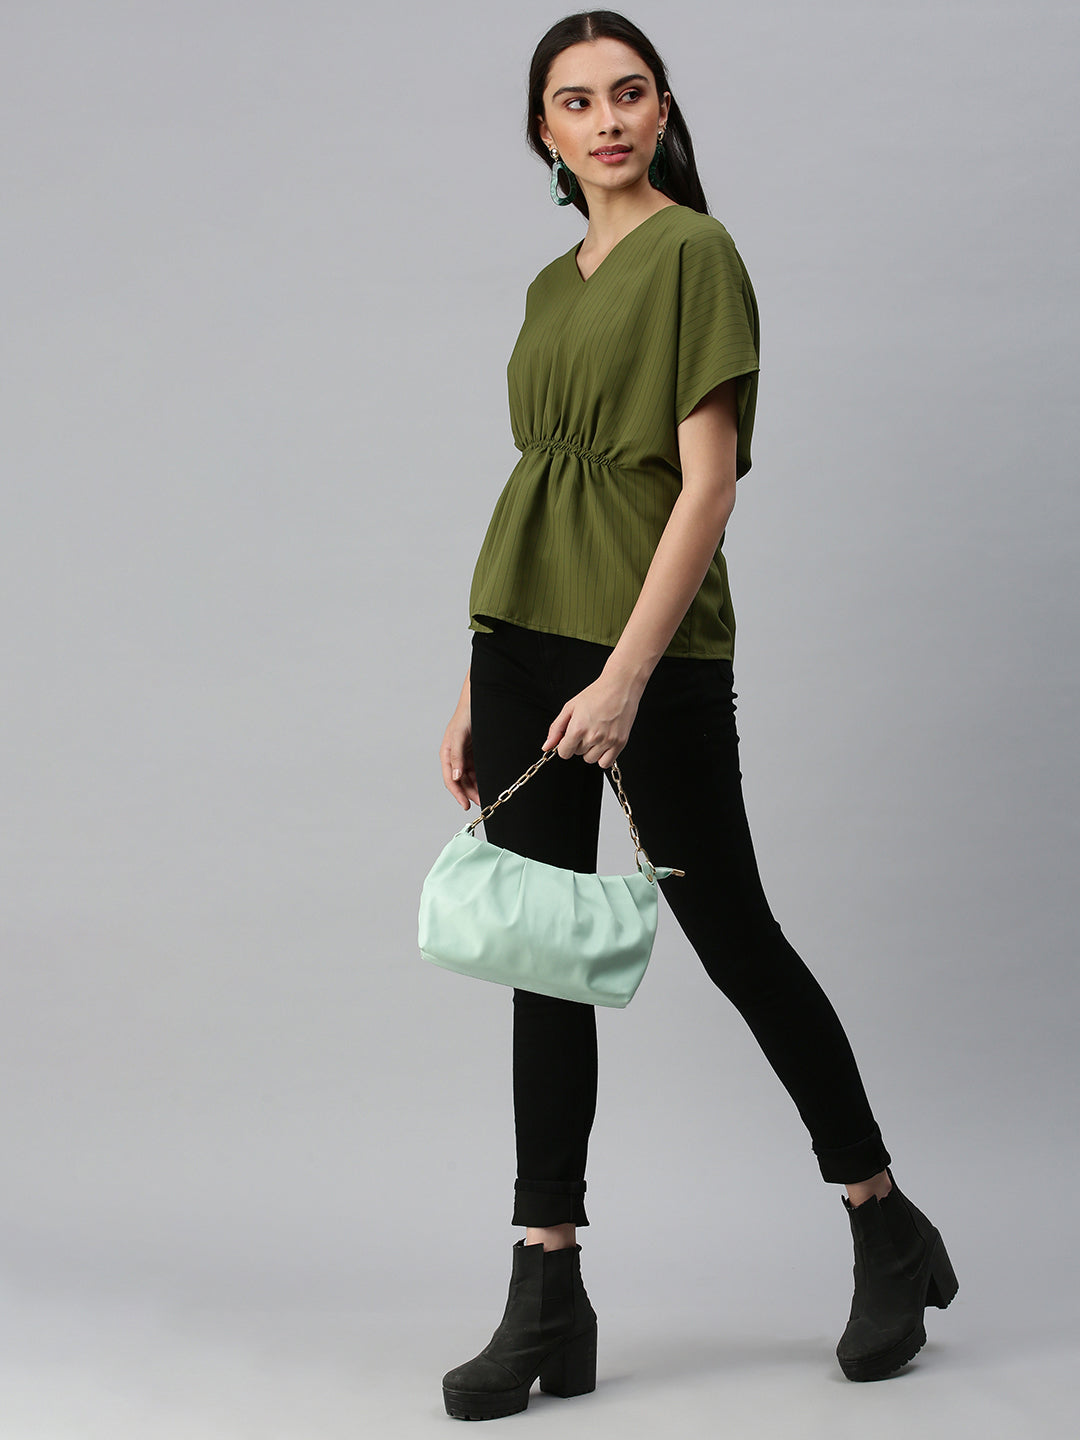 Women's Striped Olive Top